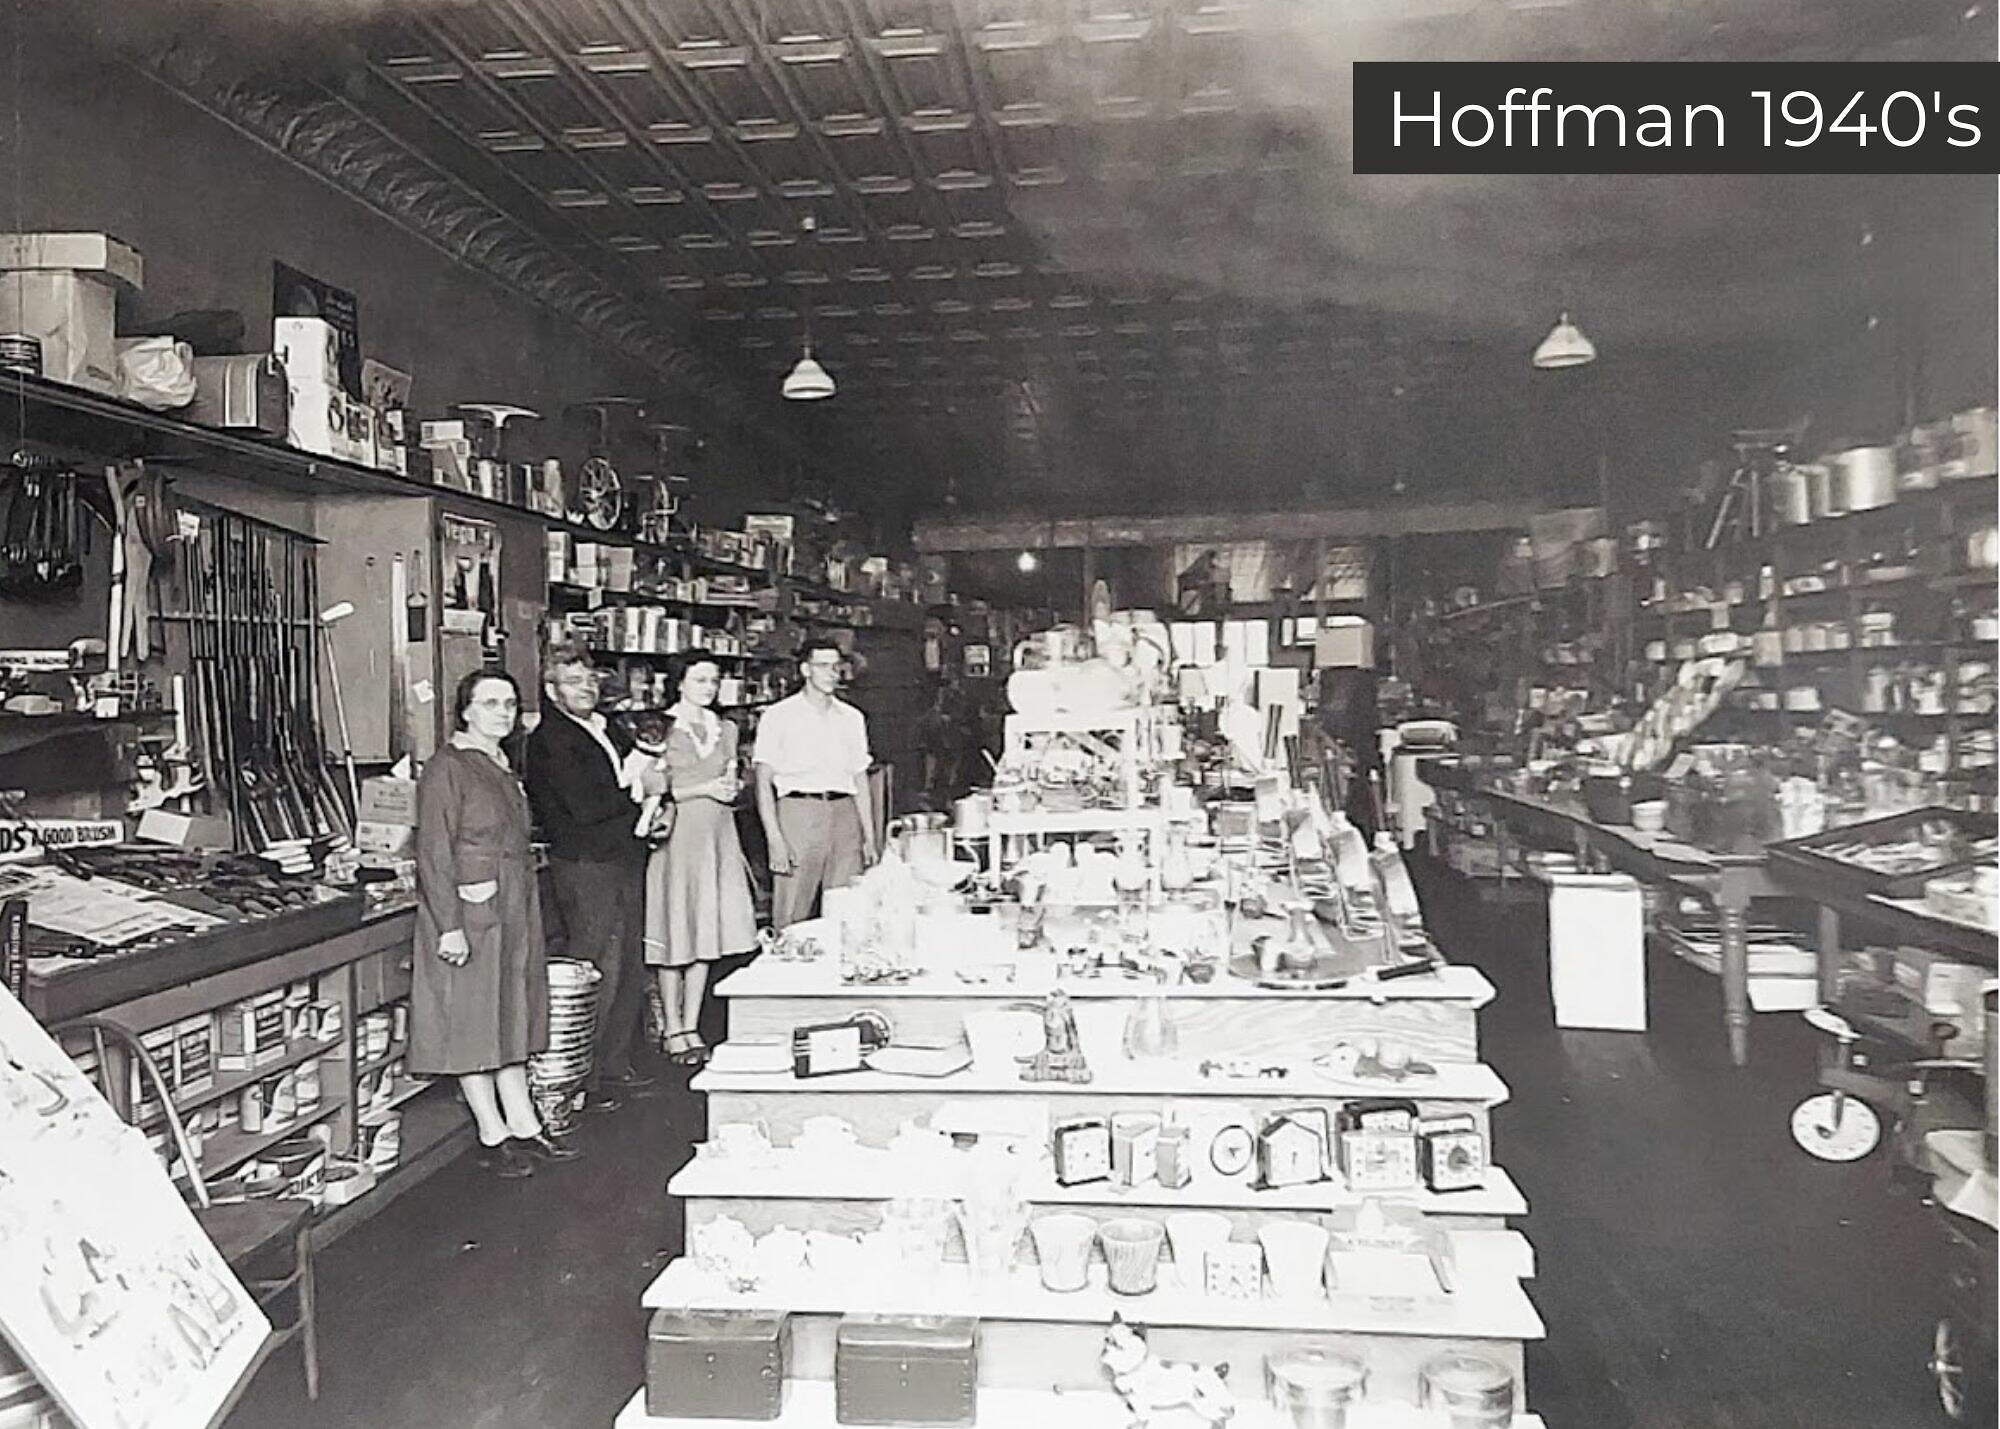 A glimpse of the past: patrons and staff stand amidst the assorted wares of a bustling general store in the 1940s, where the shelves are brimming with goods from floor to ceiling.